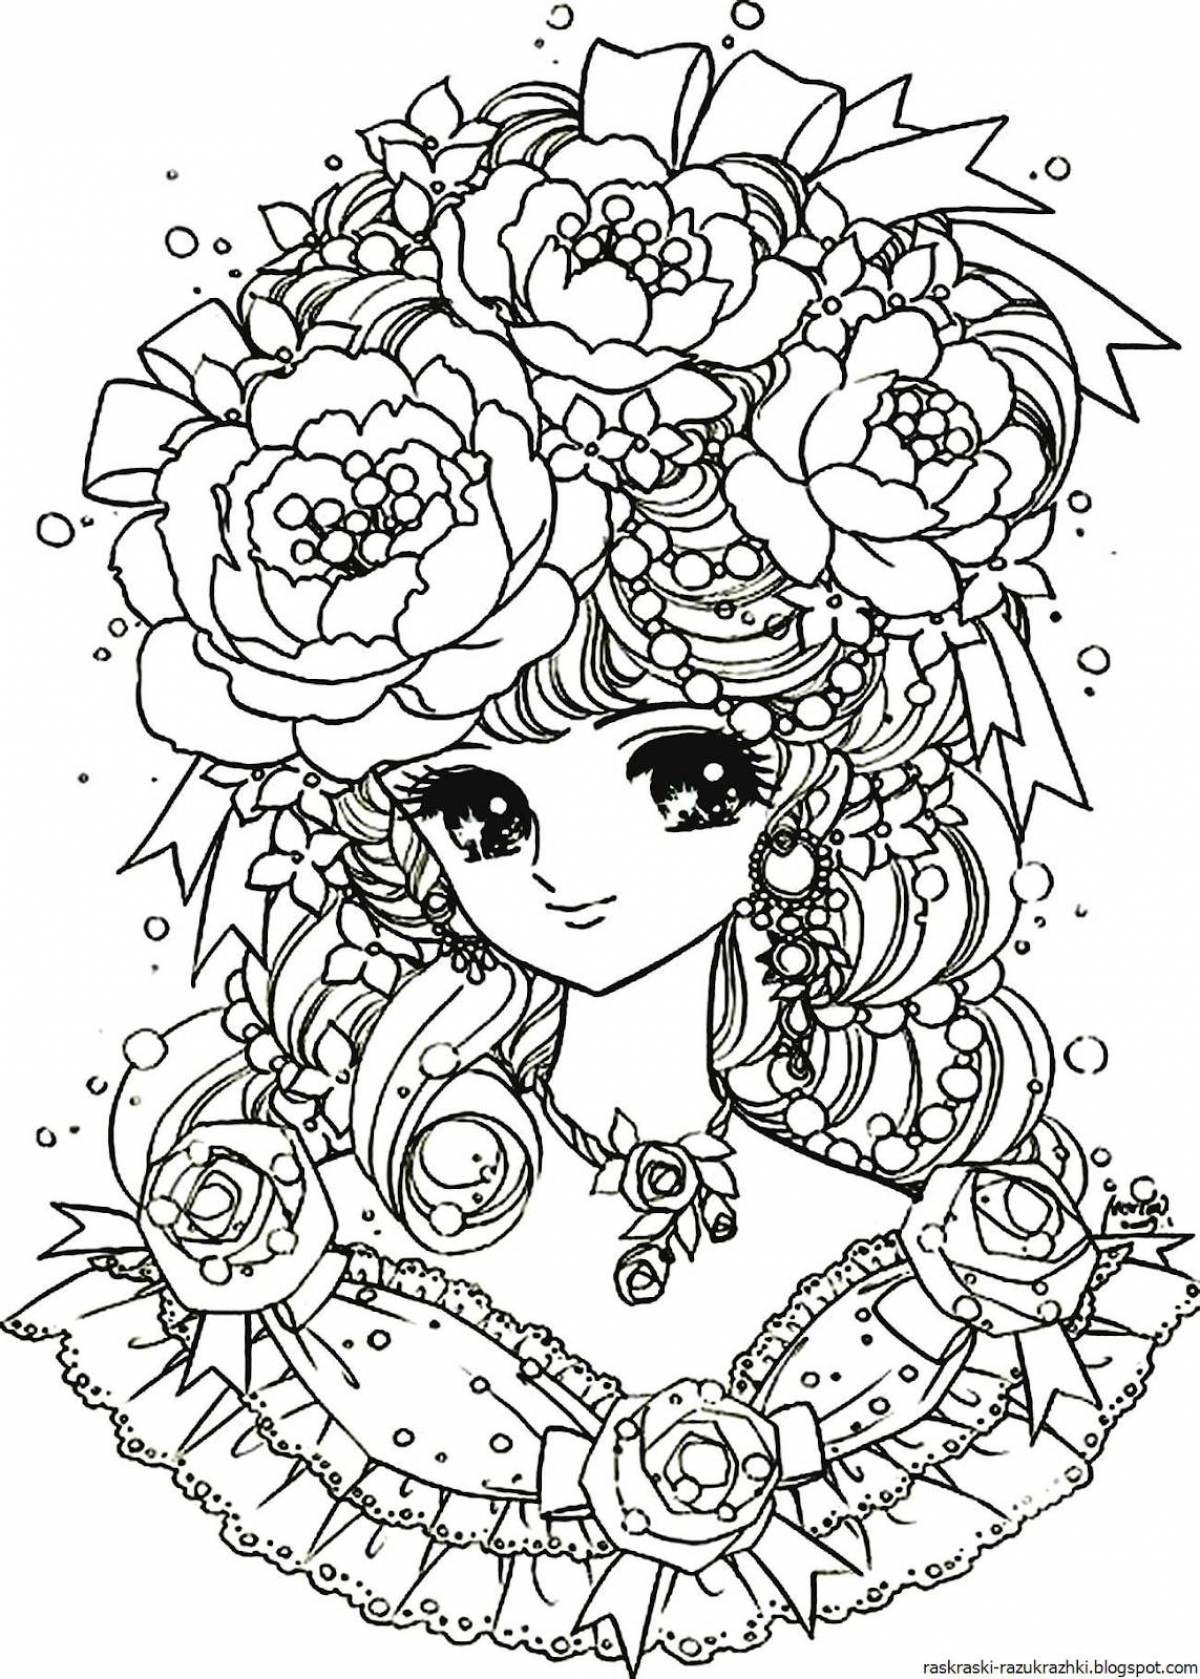 Royal coloring for girls 10 years old